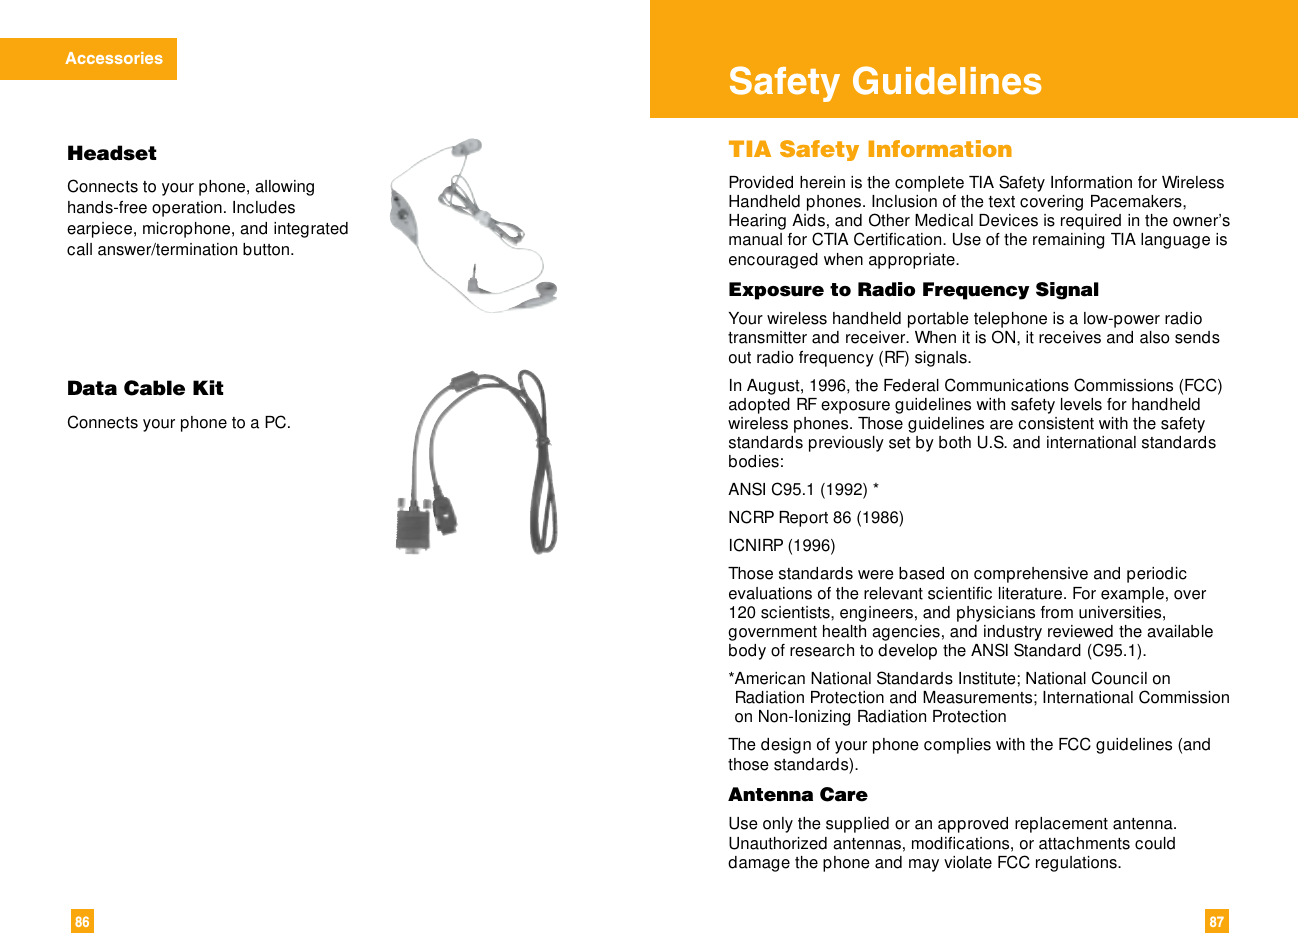 8786AccessoriesTIA Safety InformationProvided herein is the complete TIA Safety Information for WirelessHandheld phones. Inclusion of the text covering Pacemakers,Hearing Aids, and Other Medical Devices is required in the owner’smanual for CTIA Certification. Use of the remaining TIA language isencouraged when appropriate.Exposure to Radio Frequency SignalYour wireless handheld portable telephone is a low-power radiotransmitter and receiver. When it is ON, it receives and also sendsout radio frequency (RF) signals.In August, 1996, the Federal Communications Commissions (FCC)adopted RF exposure guidelines with safety levels for handheldwireless phones. Those guidelines are consistent with the safetystandards previously set by both U.S. and international standardsbodies:ANSI C95.1 (1992) *NCRP Report 86 (1986)ICNIRP (1996)Those standards were based on comprehensive and periodicevaluations of the relevant scientific literature. For example, over120 scientists, engineers, and physicians from universities,government health agencies, and industry reviewed the availablebody of research to develop the ANSI Standard (C95.1).*American National Standards Institute; National Council onRadiation Protection and Measurements; International Commissionon Non-Ionizing Radiation ProtectionThe design of your phone complies with the FCC guidelines (andthose standards).Antenna CareUse only the supplied or an approved replacement antenna.Unauthorized antennas, modifications, or attachments coulddamage the phone and may violate FCC regulations.Safety GuidelinesData Cable KitConnects your phone to a PC.HeadsetConnects to your phone, allowinghands-free operation. Includesearpiece, microphone, and integratedcall answer/termination button.